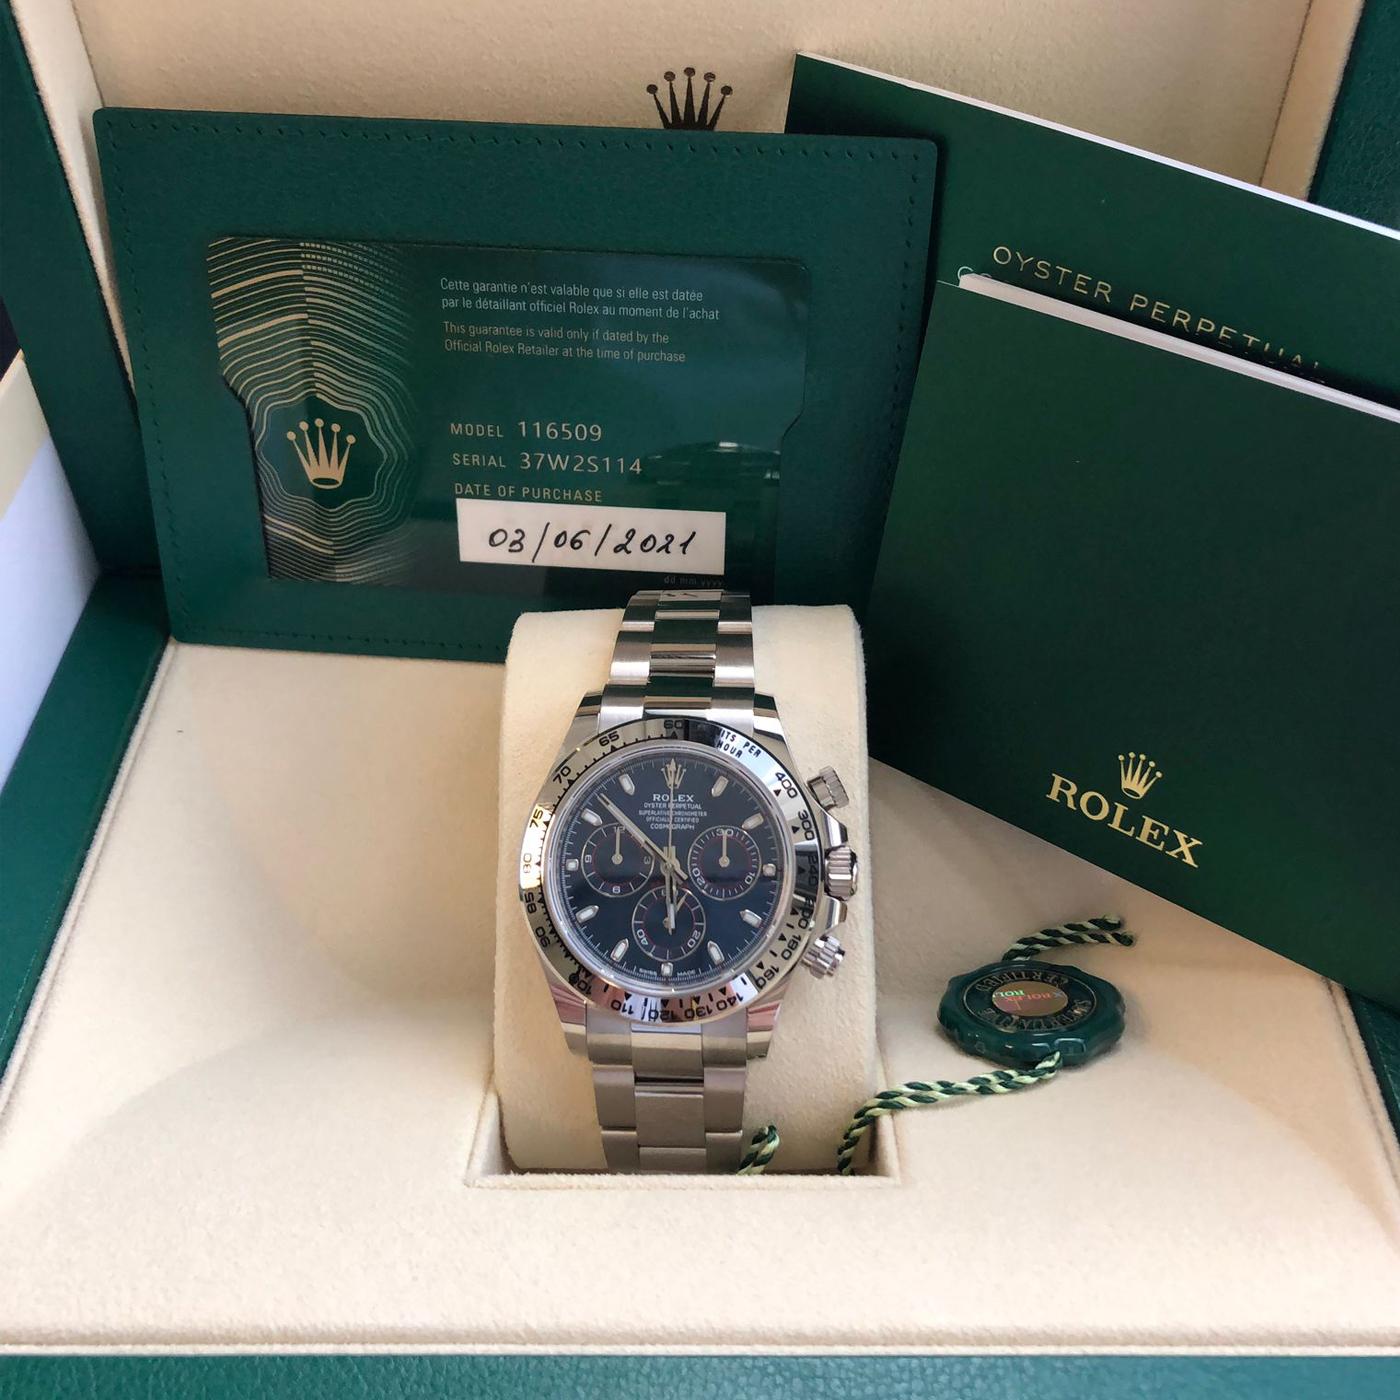 Rolex Daytona Oyster Perpetual Cosmograph 18k White Gold Blue Dial 116509 1